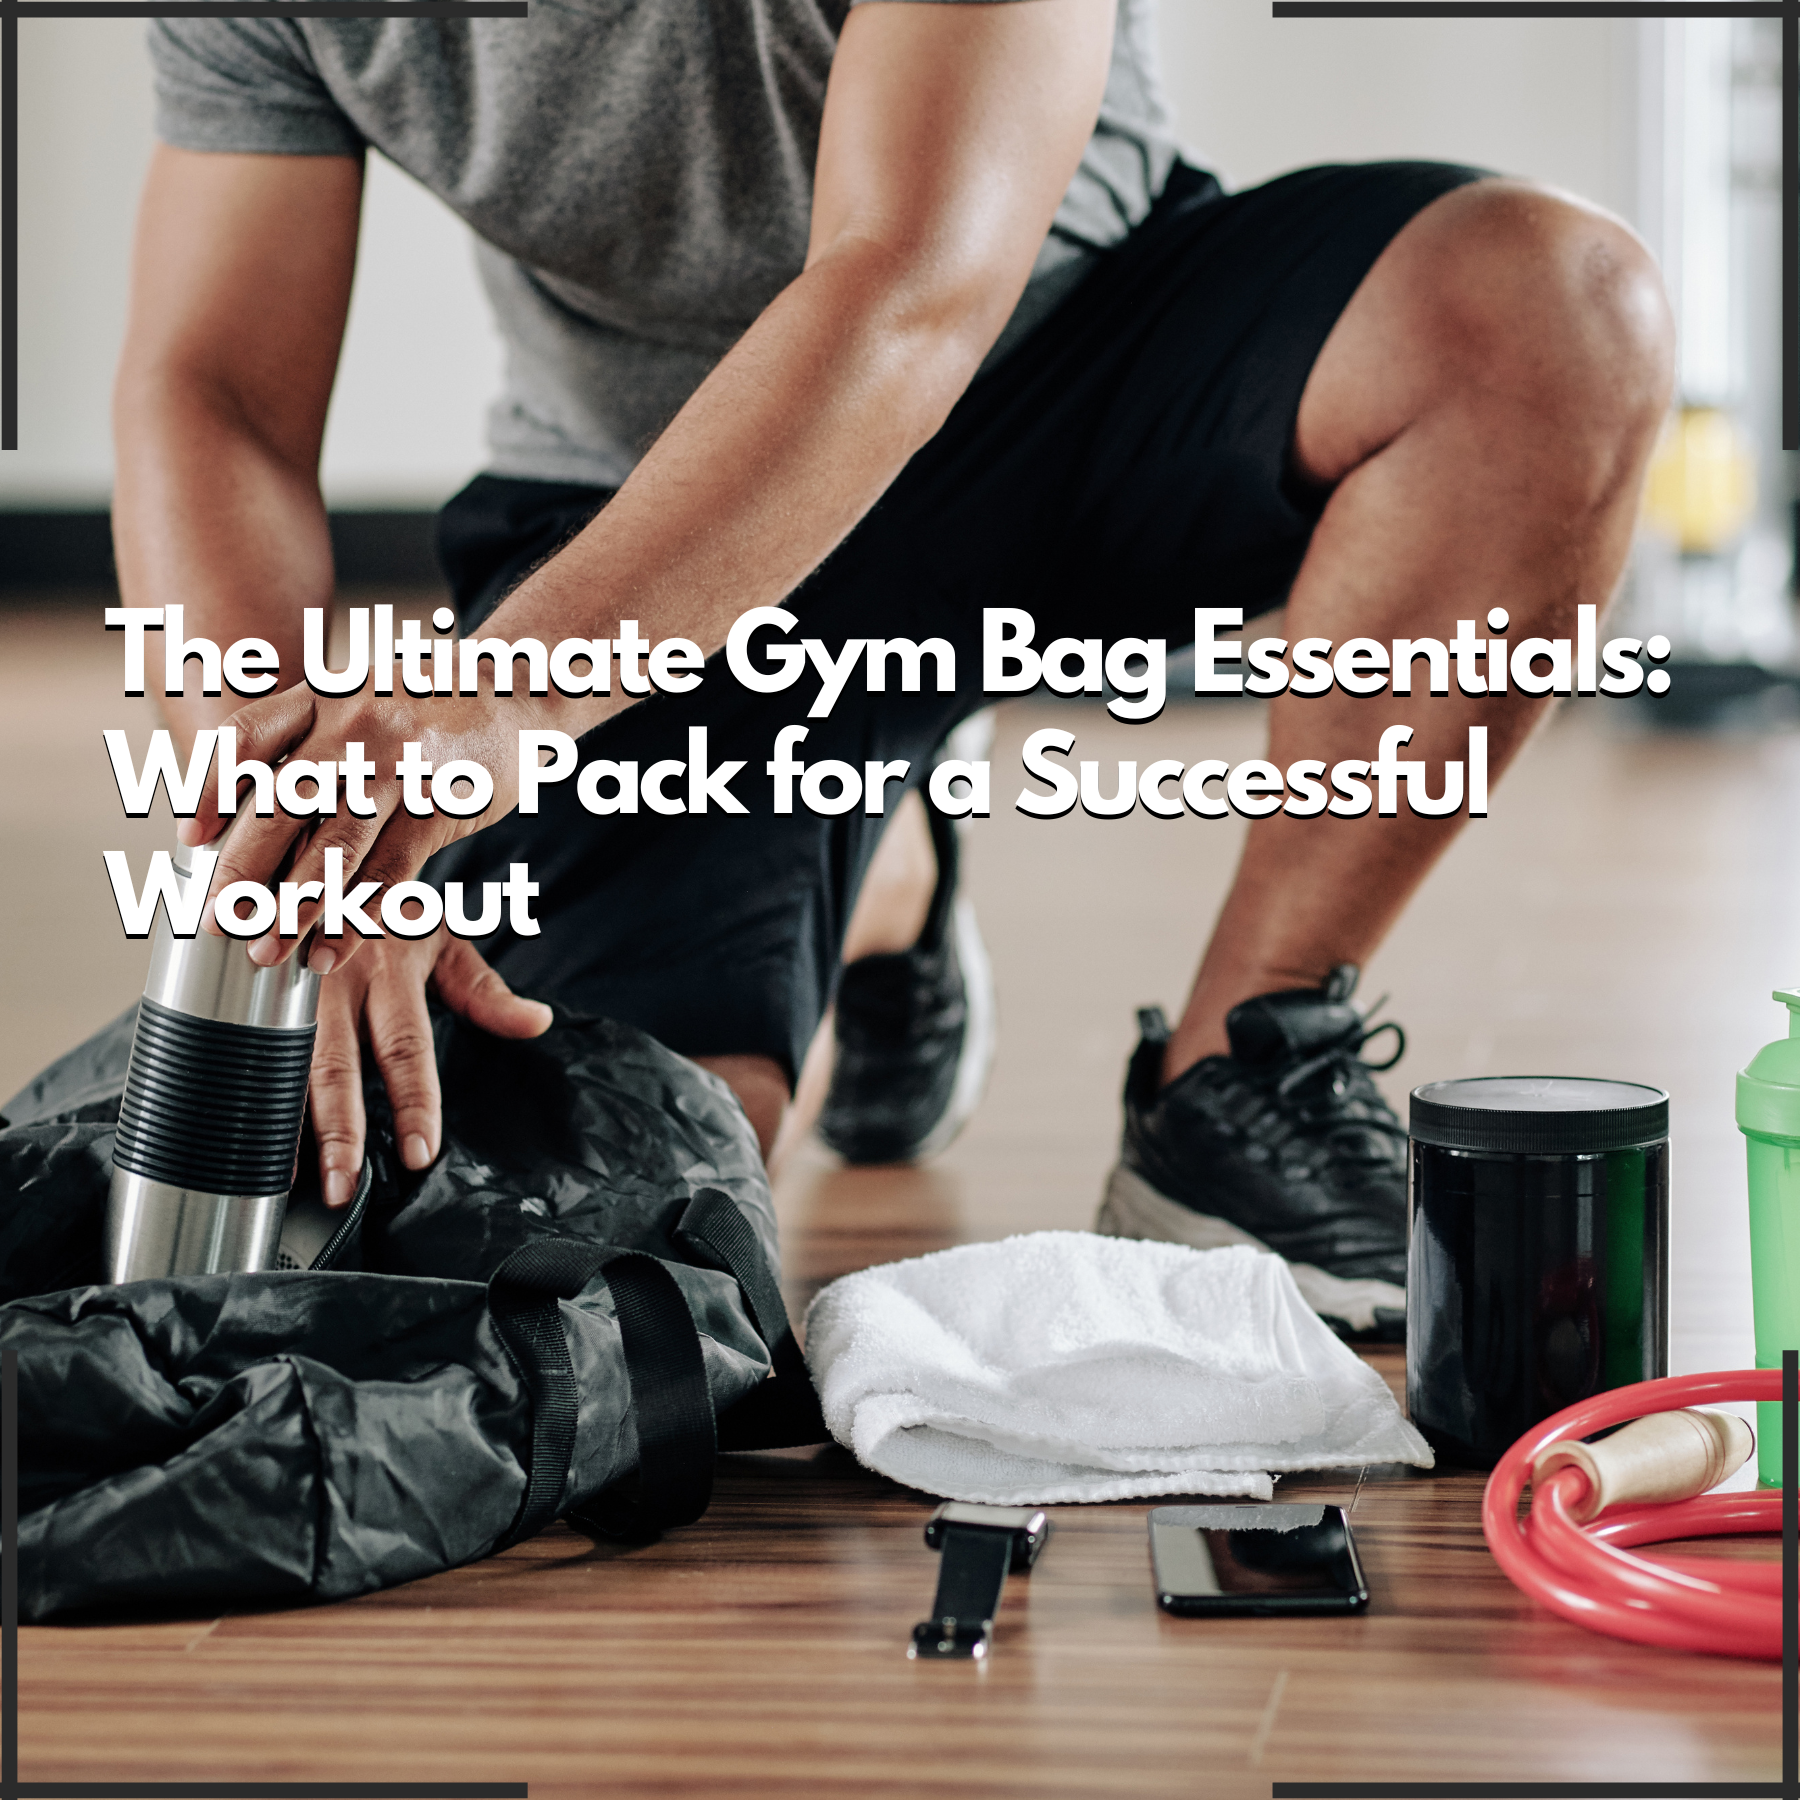 What Are the Ultimate Gym Bag Essentials?